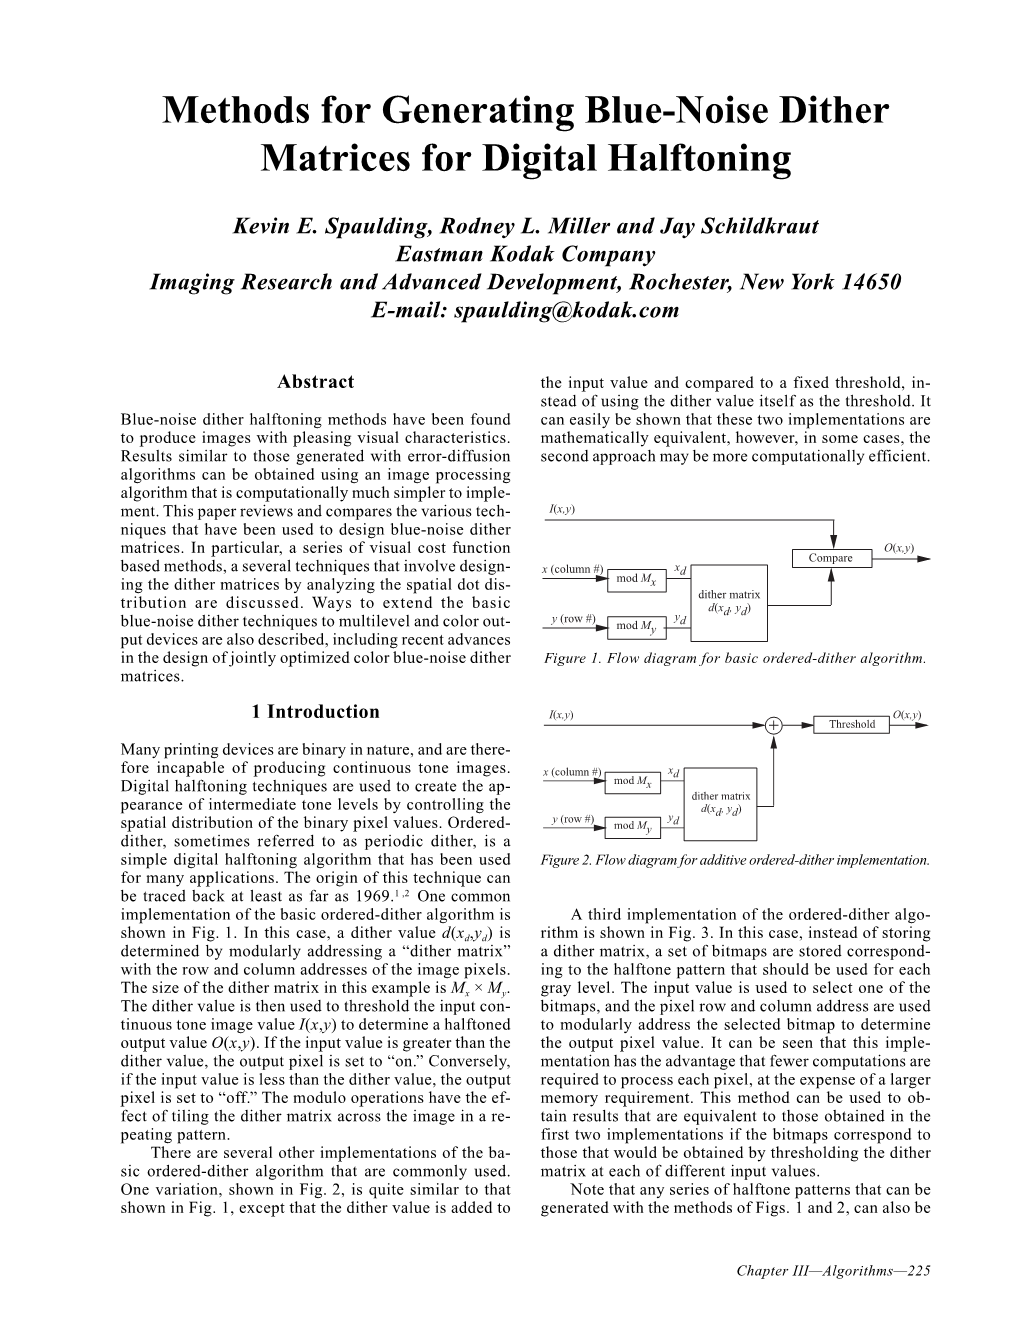 Methods for Generating Blue-Noise Dither Matrices for Digital Halftoning